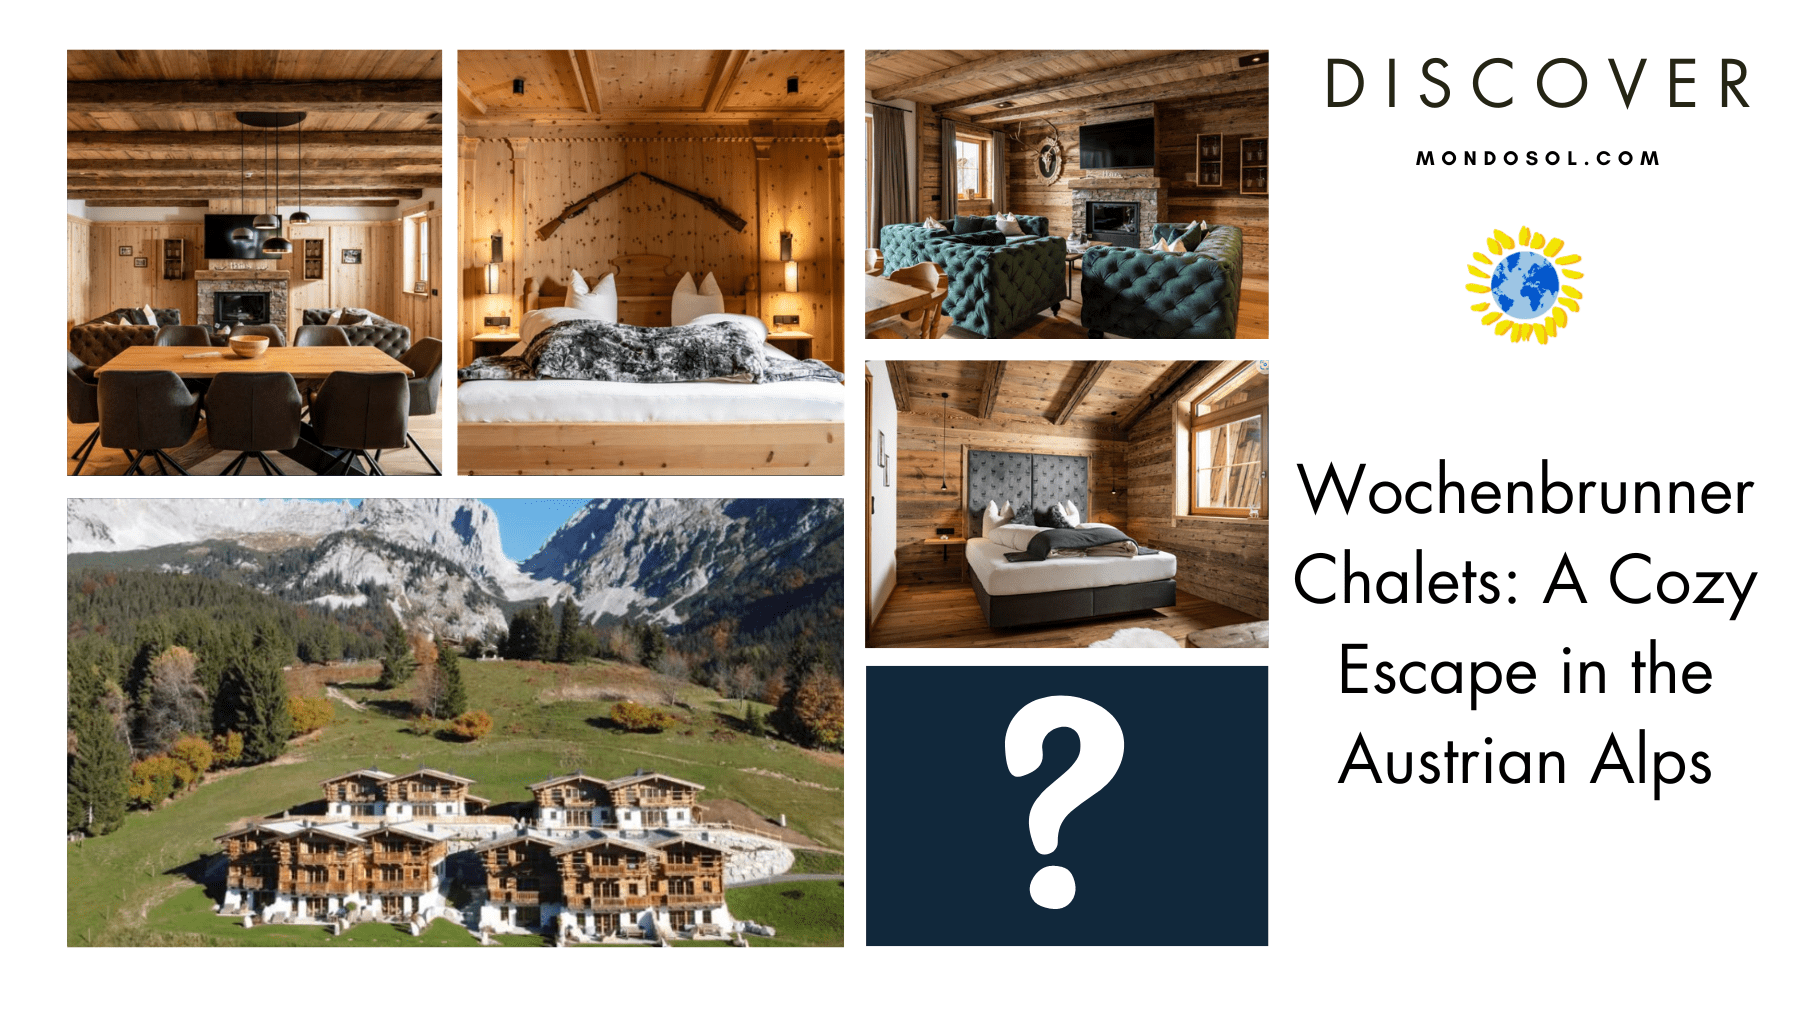 Wochenbrunner Chalets: A Cozy Escape in the Austrian Alps